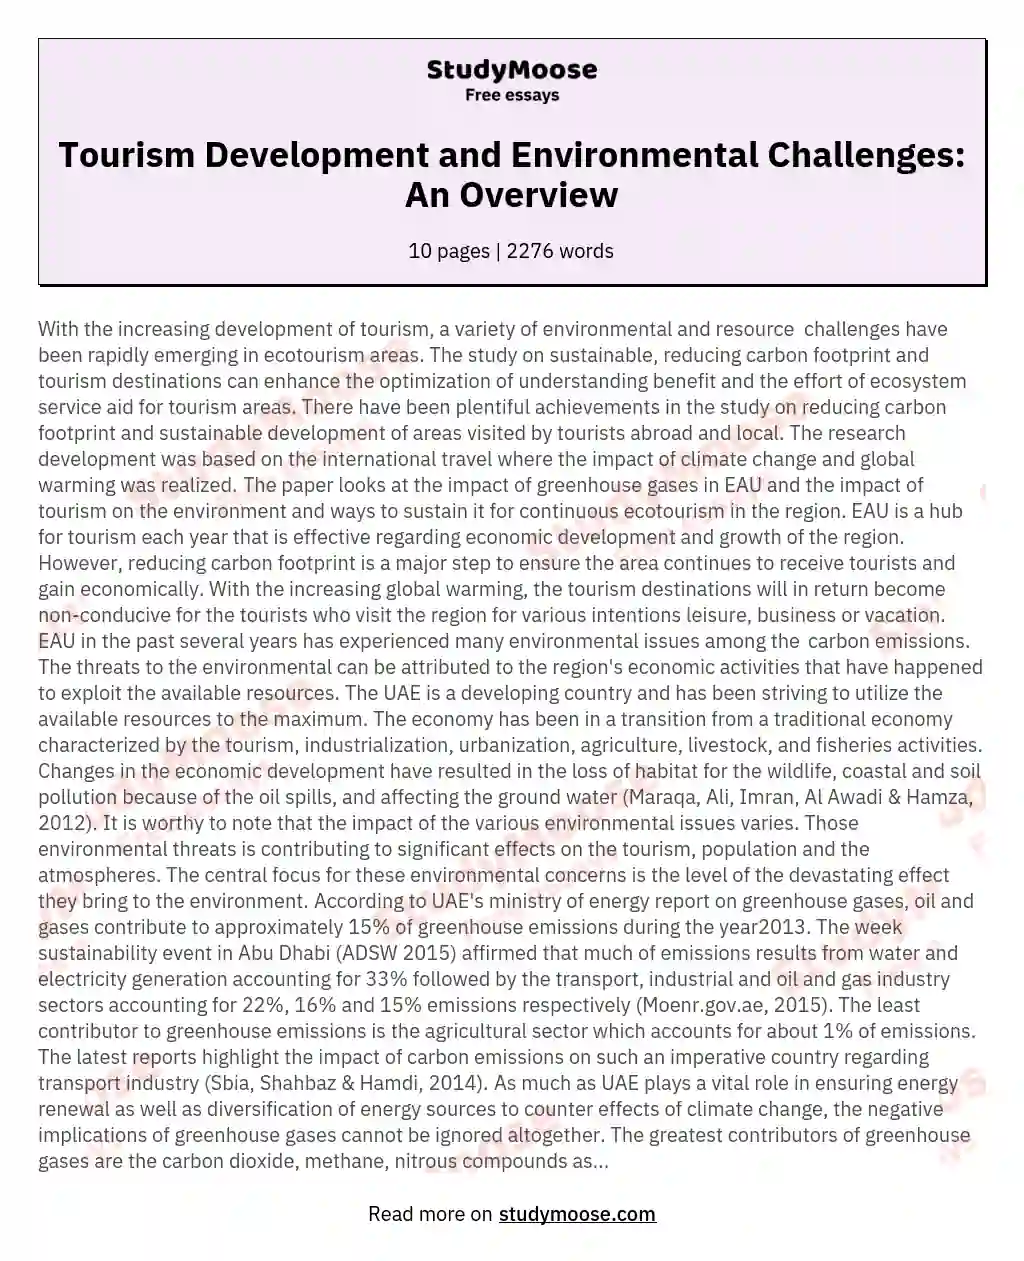 Tourism Development and Environmental Challenges: An Overview essay